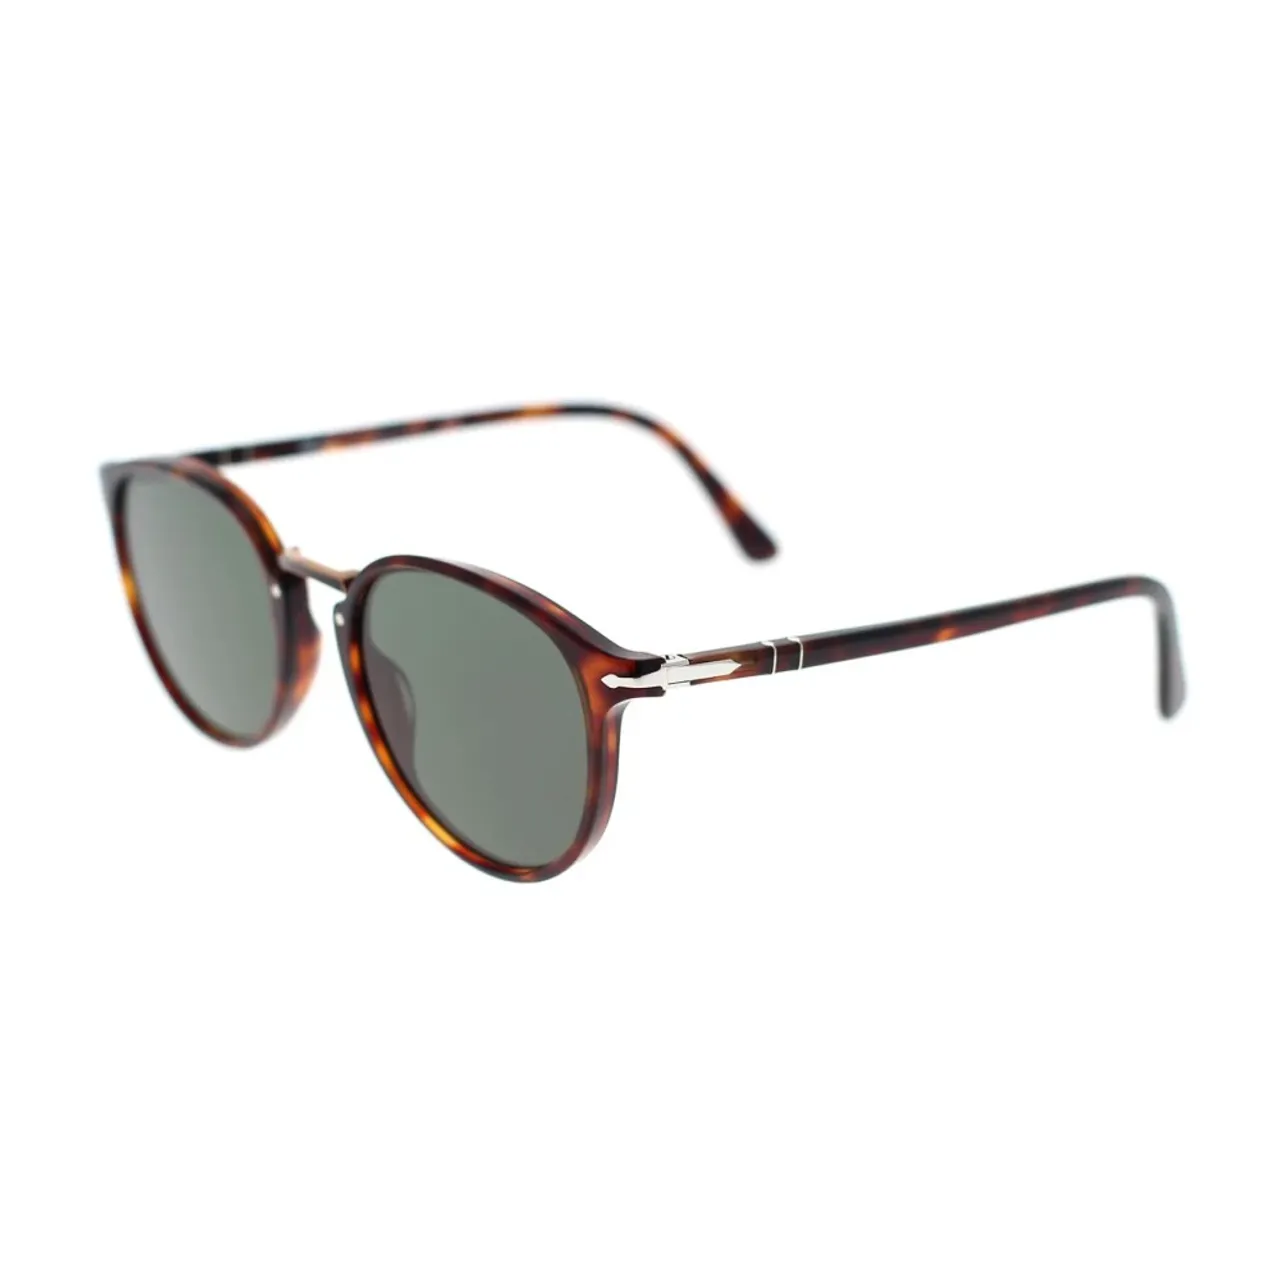 Persol , Classic Oval Sunglasses with Typewriter-Inspired Details ,Brown unisex, Sizes: